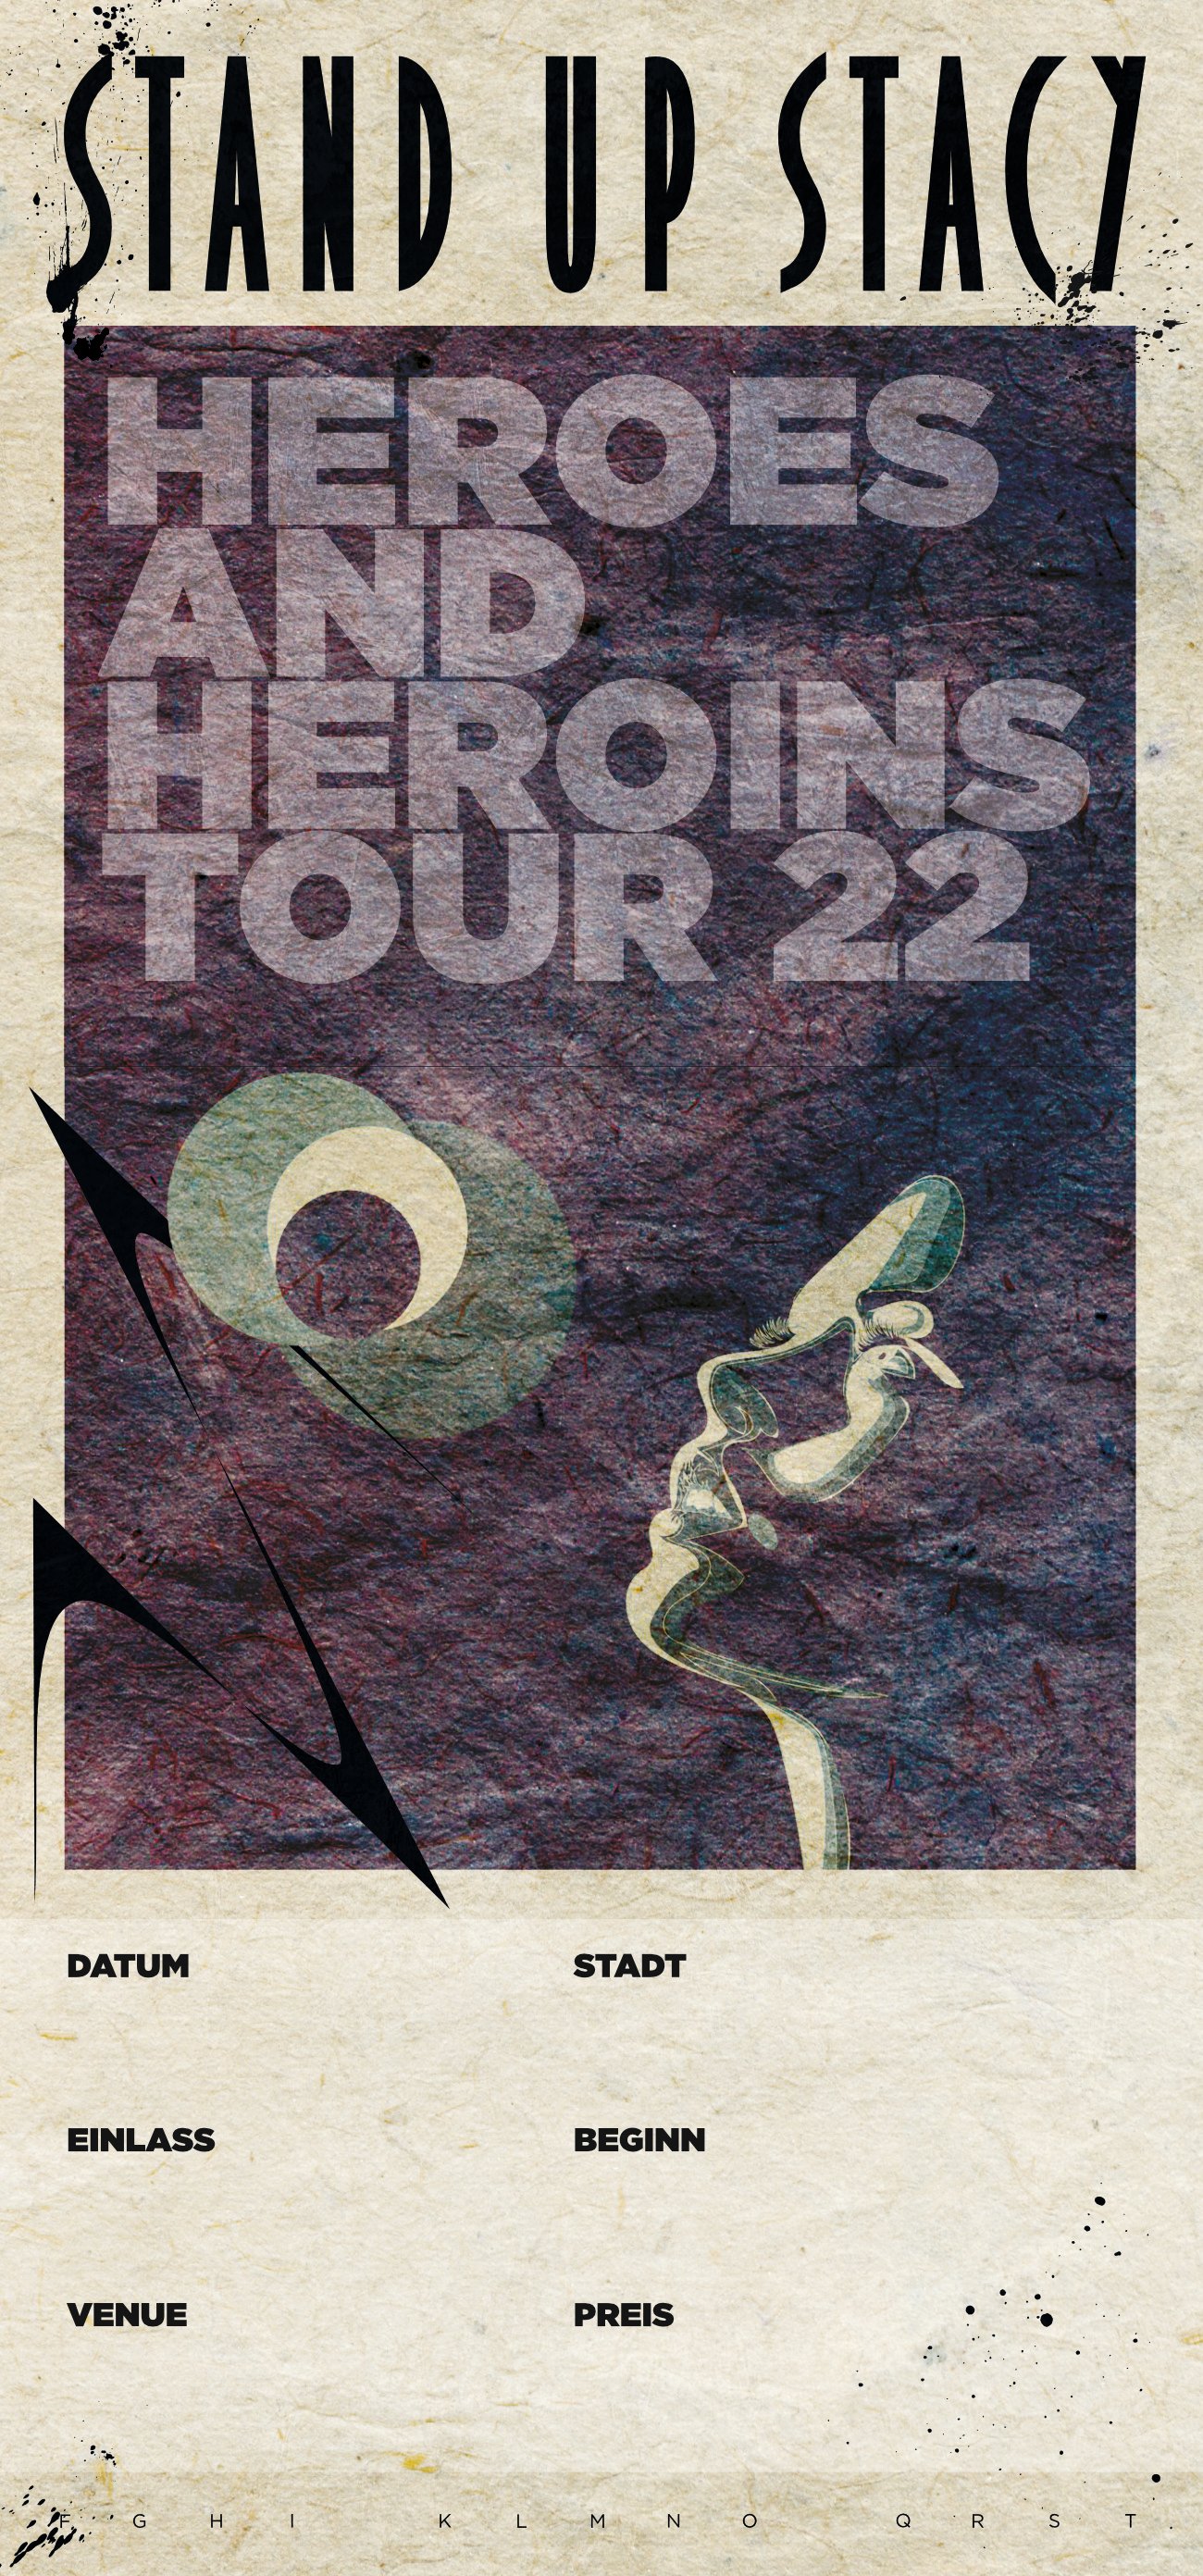 Image of Hardticket // 21.10.22 München // Heroes and Heroins Tour